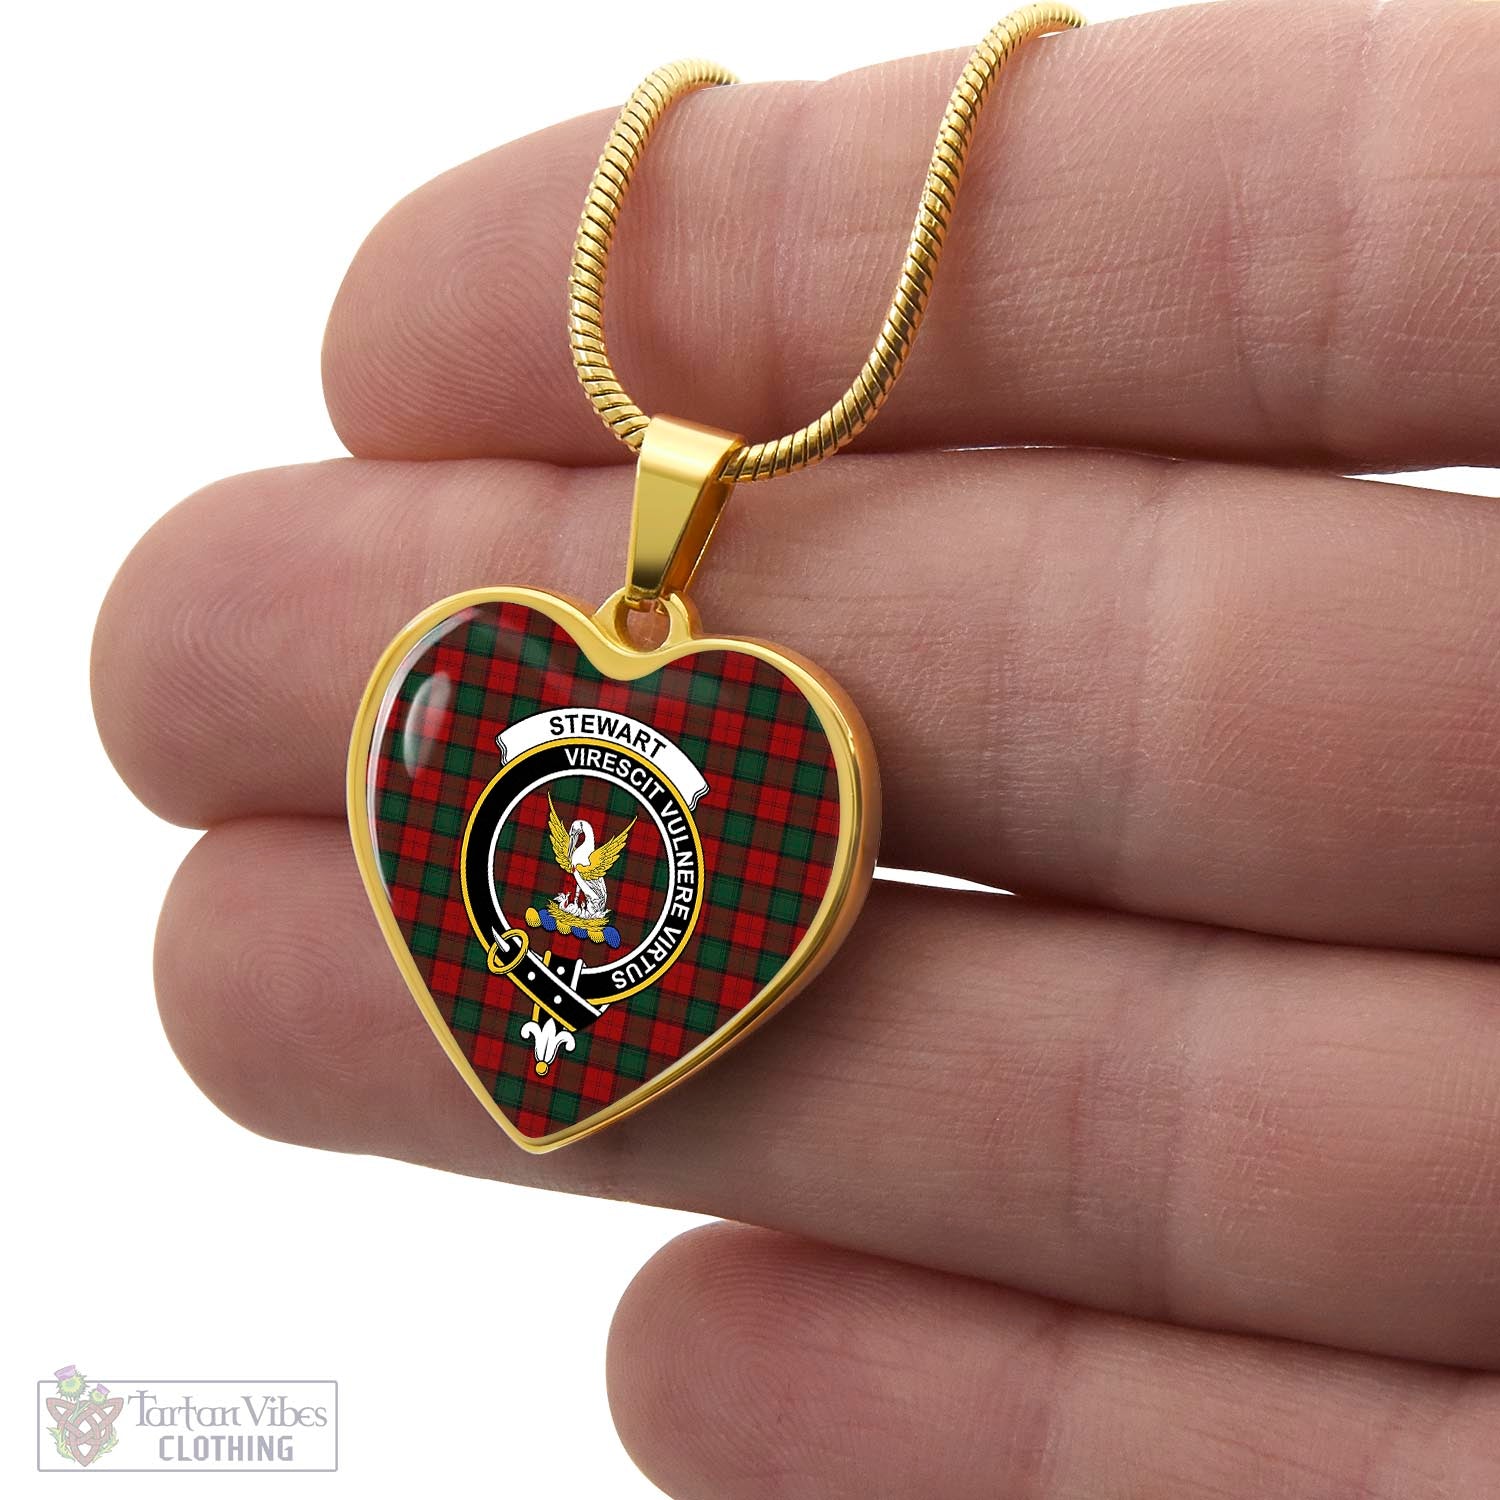 Tartan Vibes Clothing Stewart of Atholl Tartan Heart Necklace with Family Crest